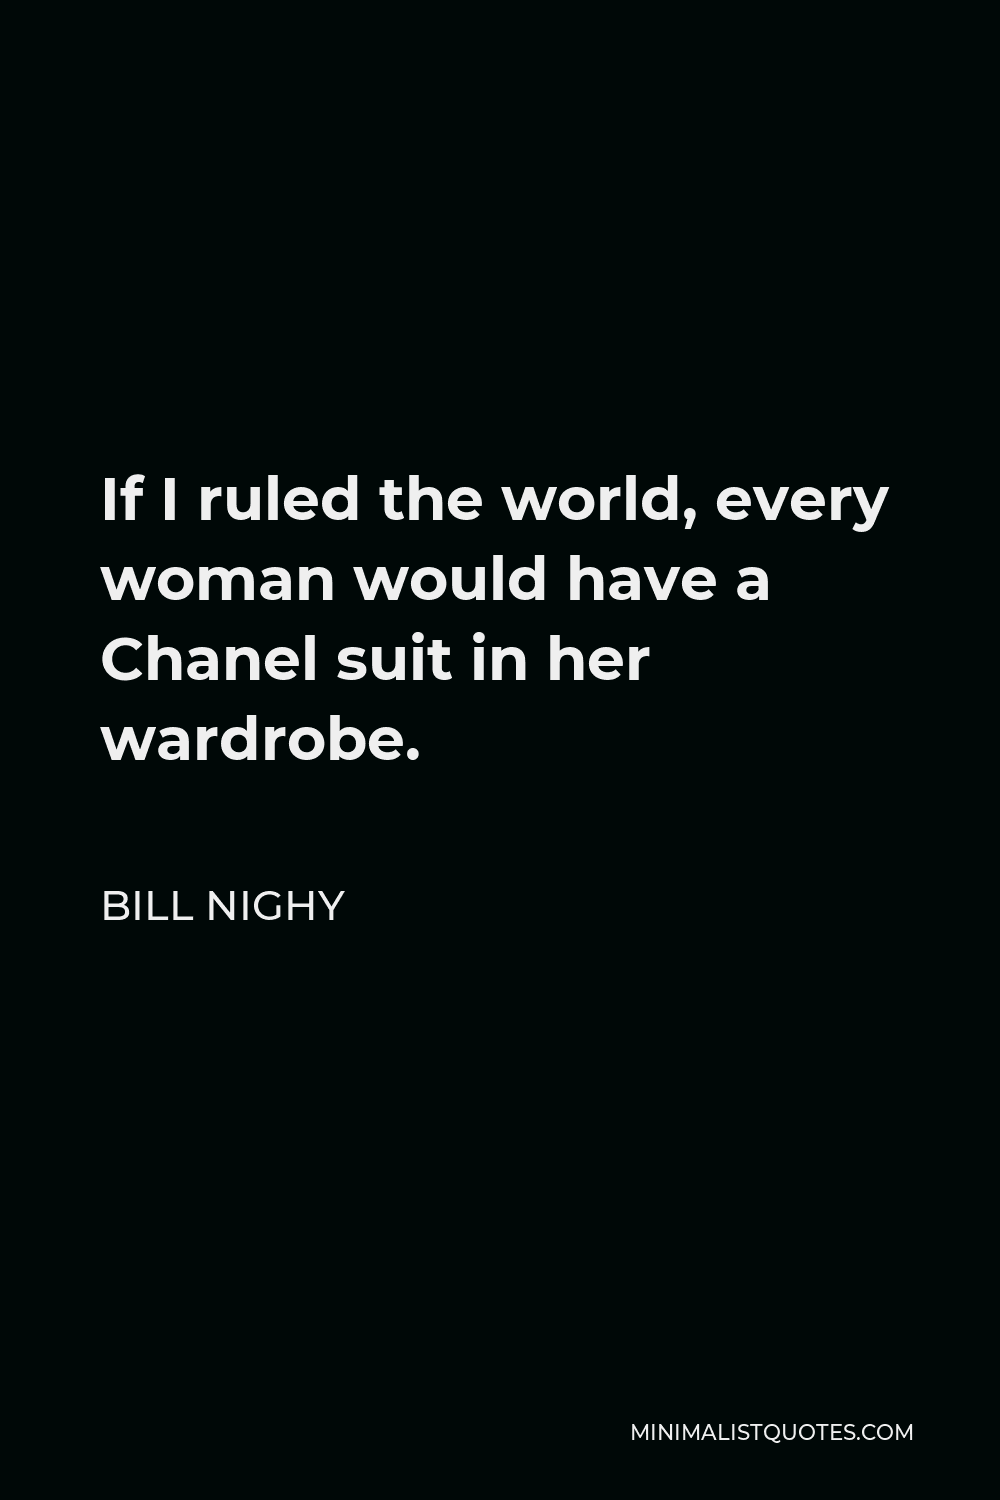 Bill Nighy Quote - If I ruled the world, every woman would have a Chanel suit in her wardrobe.